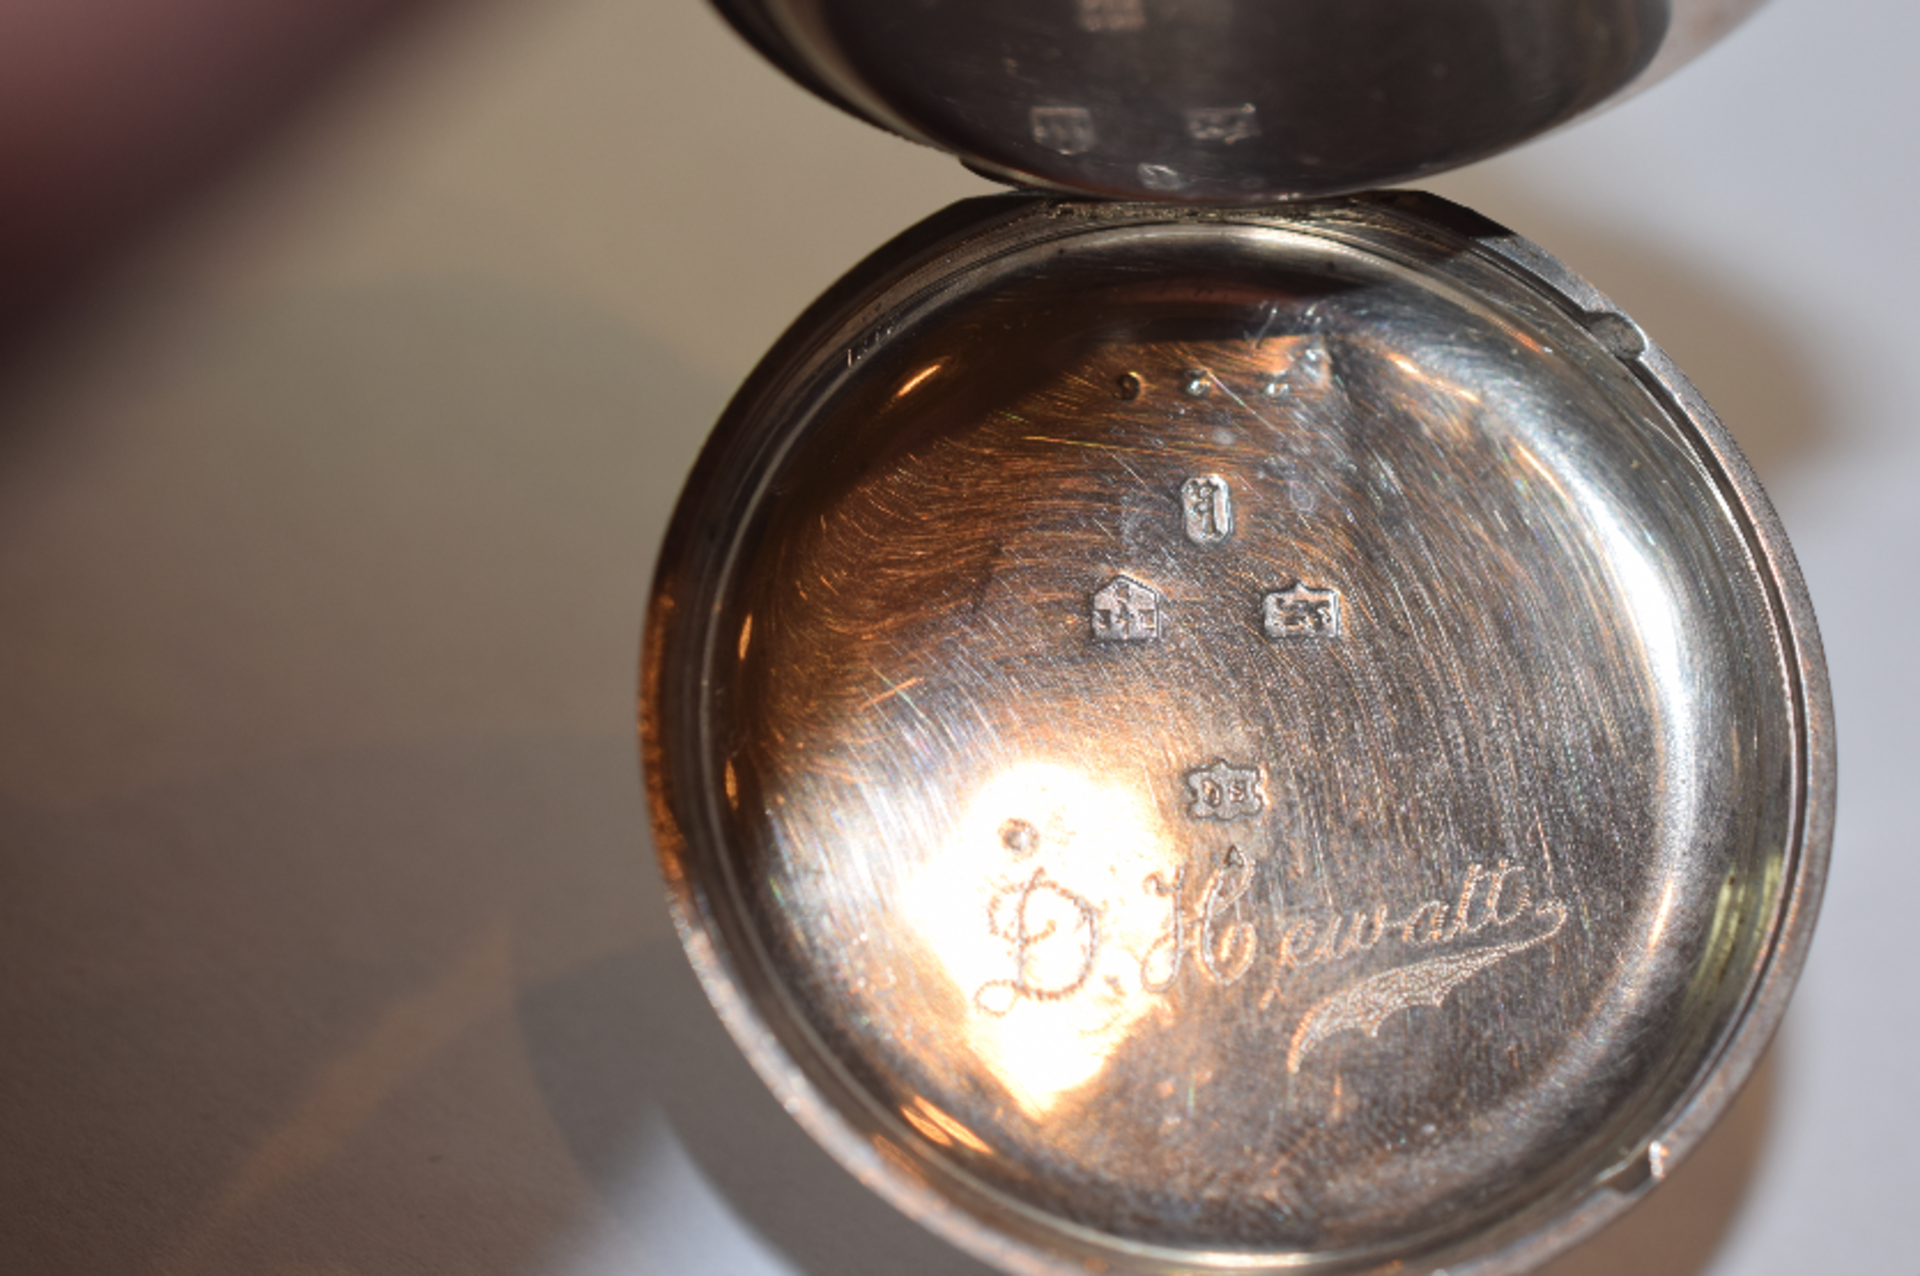 Open Face Silver Pocket Watch With Engraving Roman Numerals - Image 4 of 5